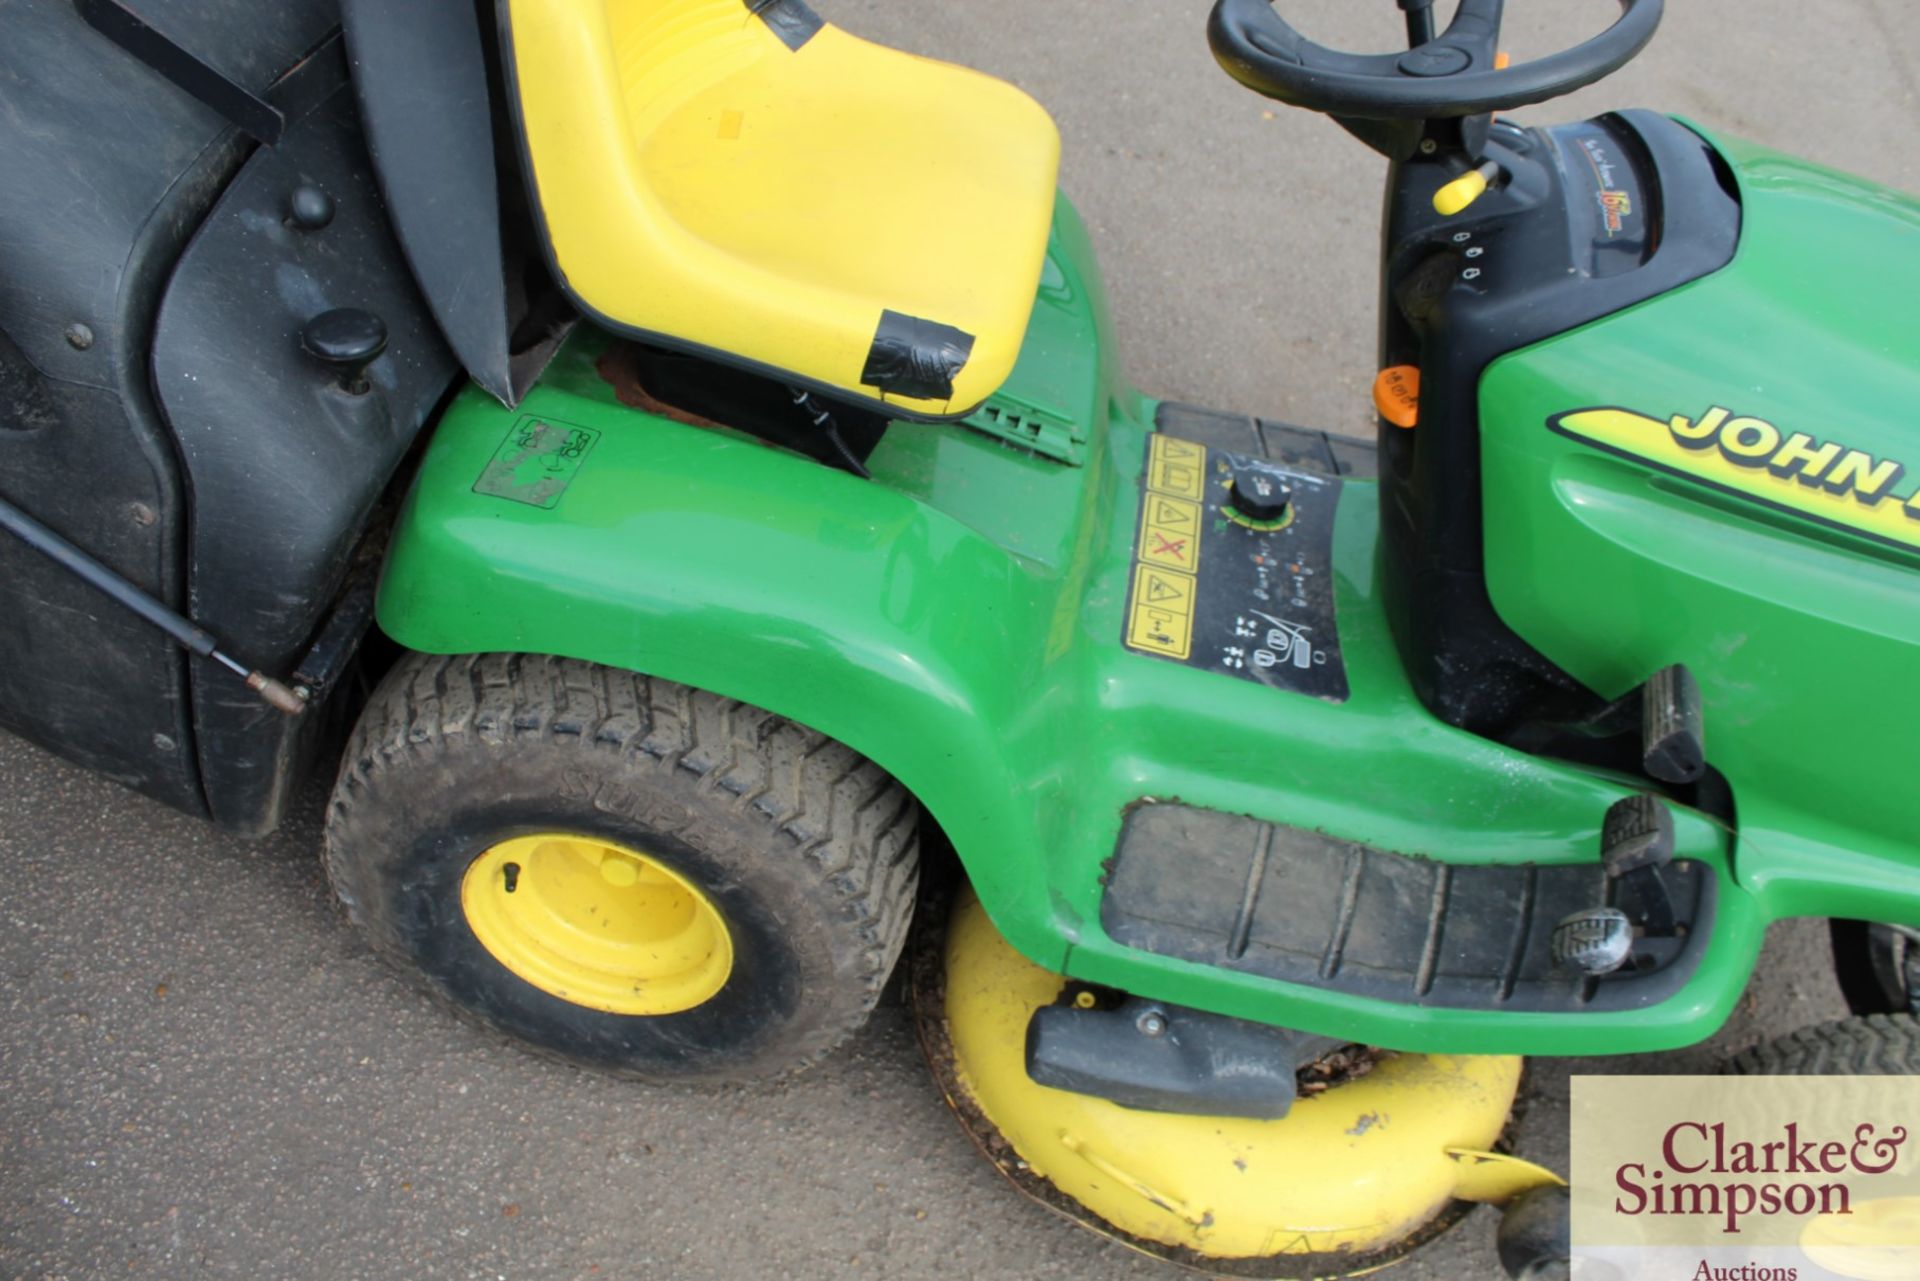 John Deere LTR 166 ride-on mower. 1999. With 16HP V-twin petrol engine and collector. - Image 6 of 7